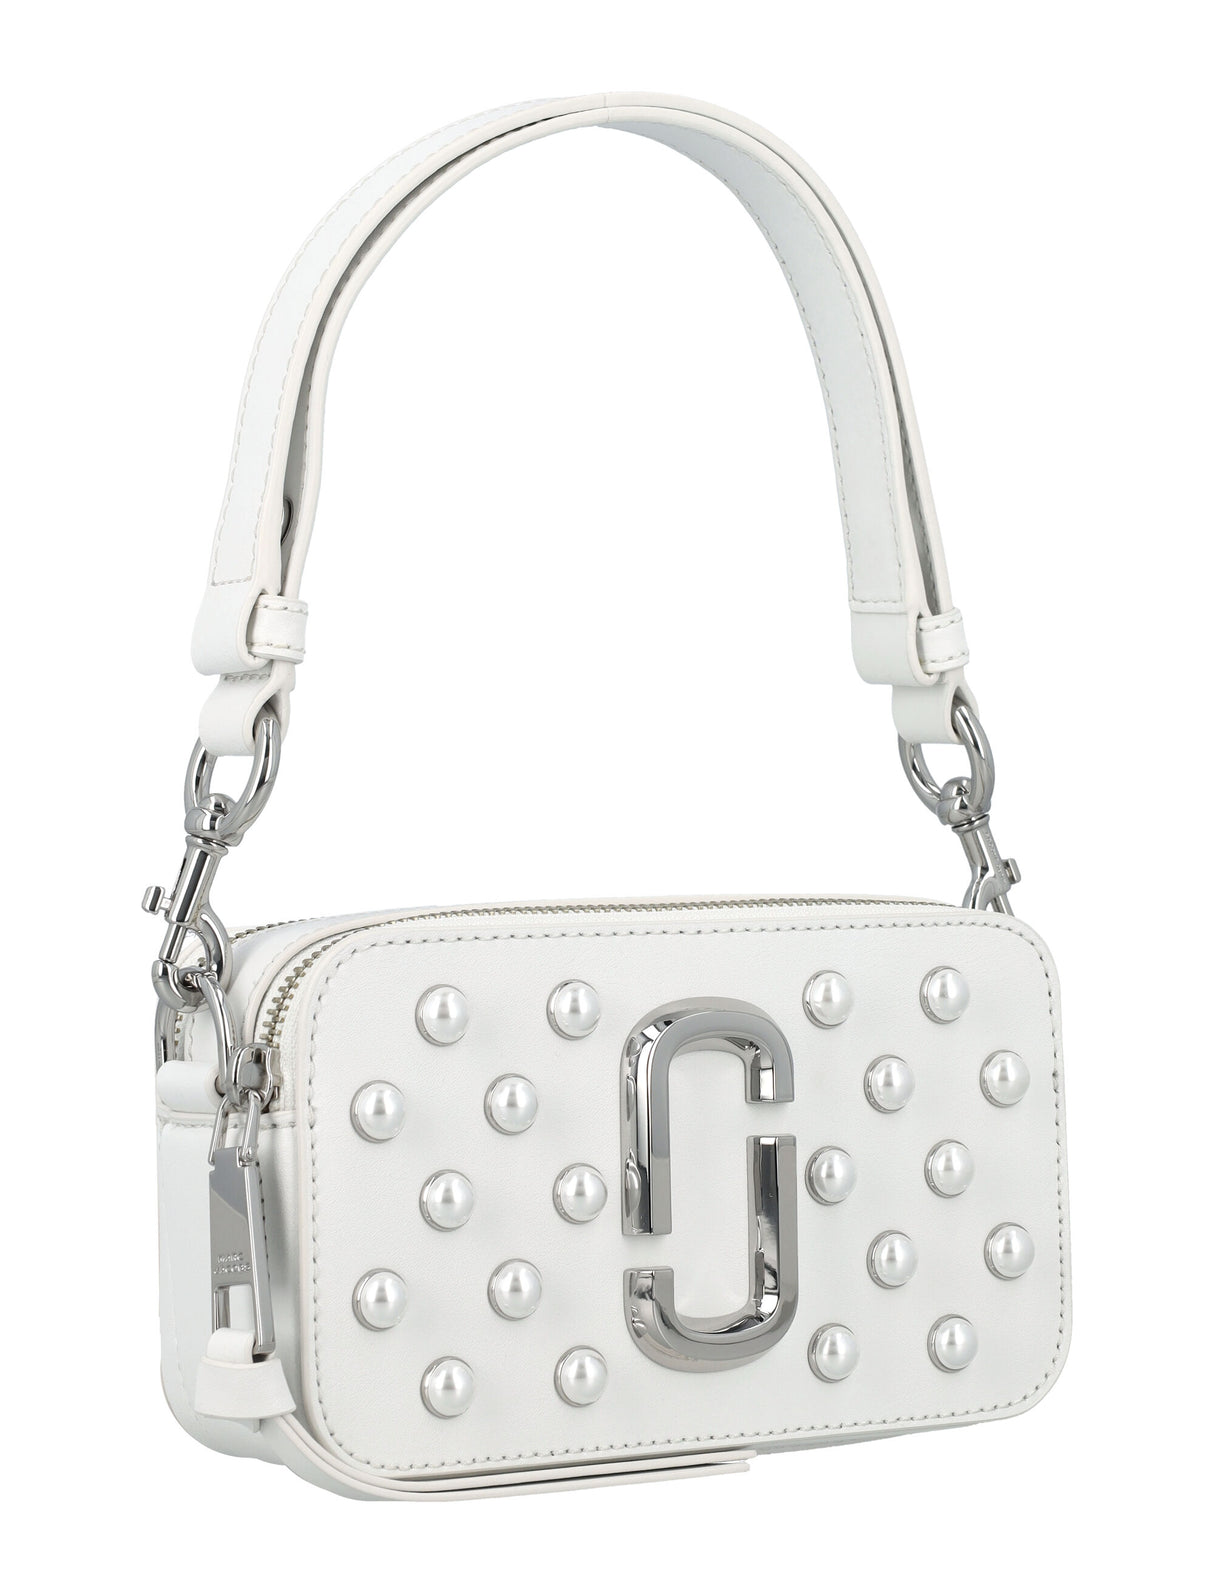 MARC JACOBS The Pearl Snapshot: A Must-Have Handbag for the Fashion-Forward Woman